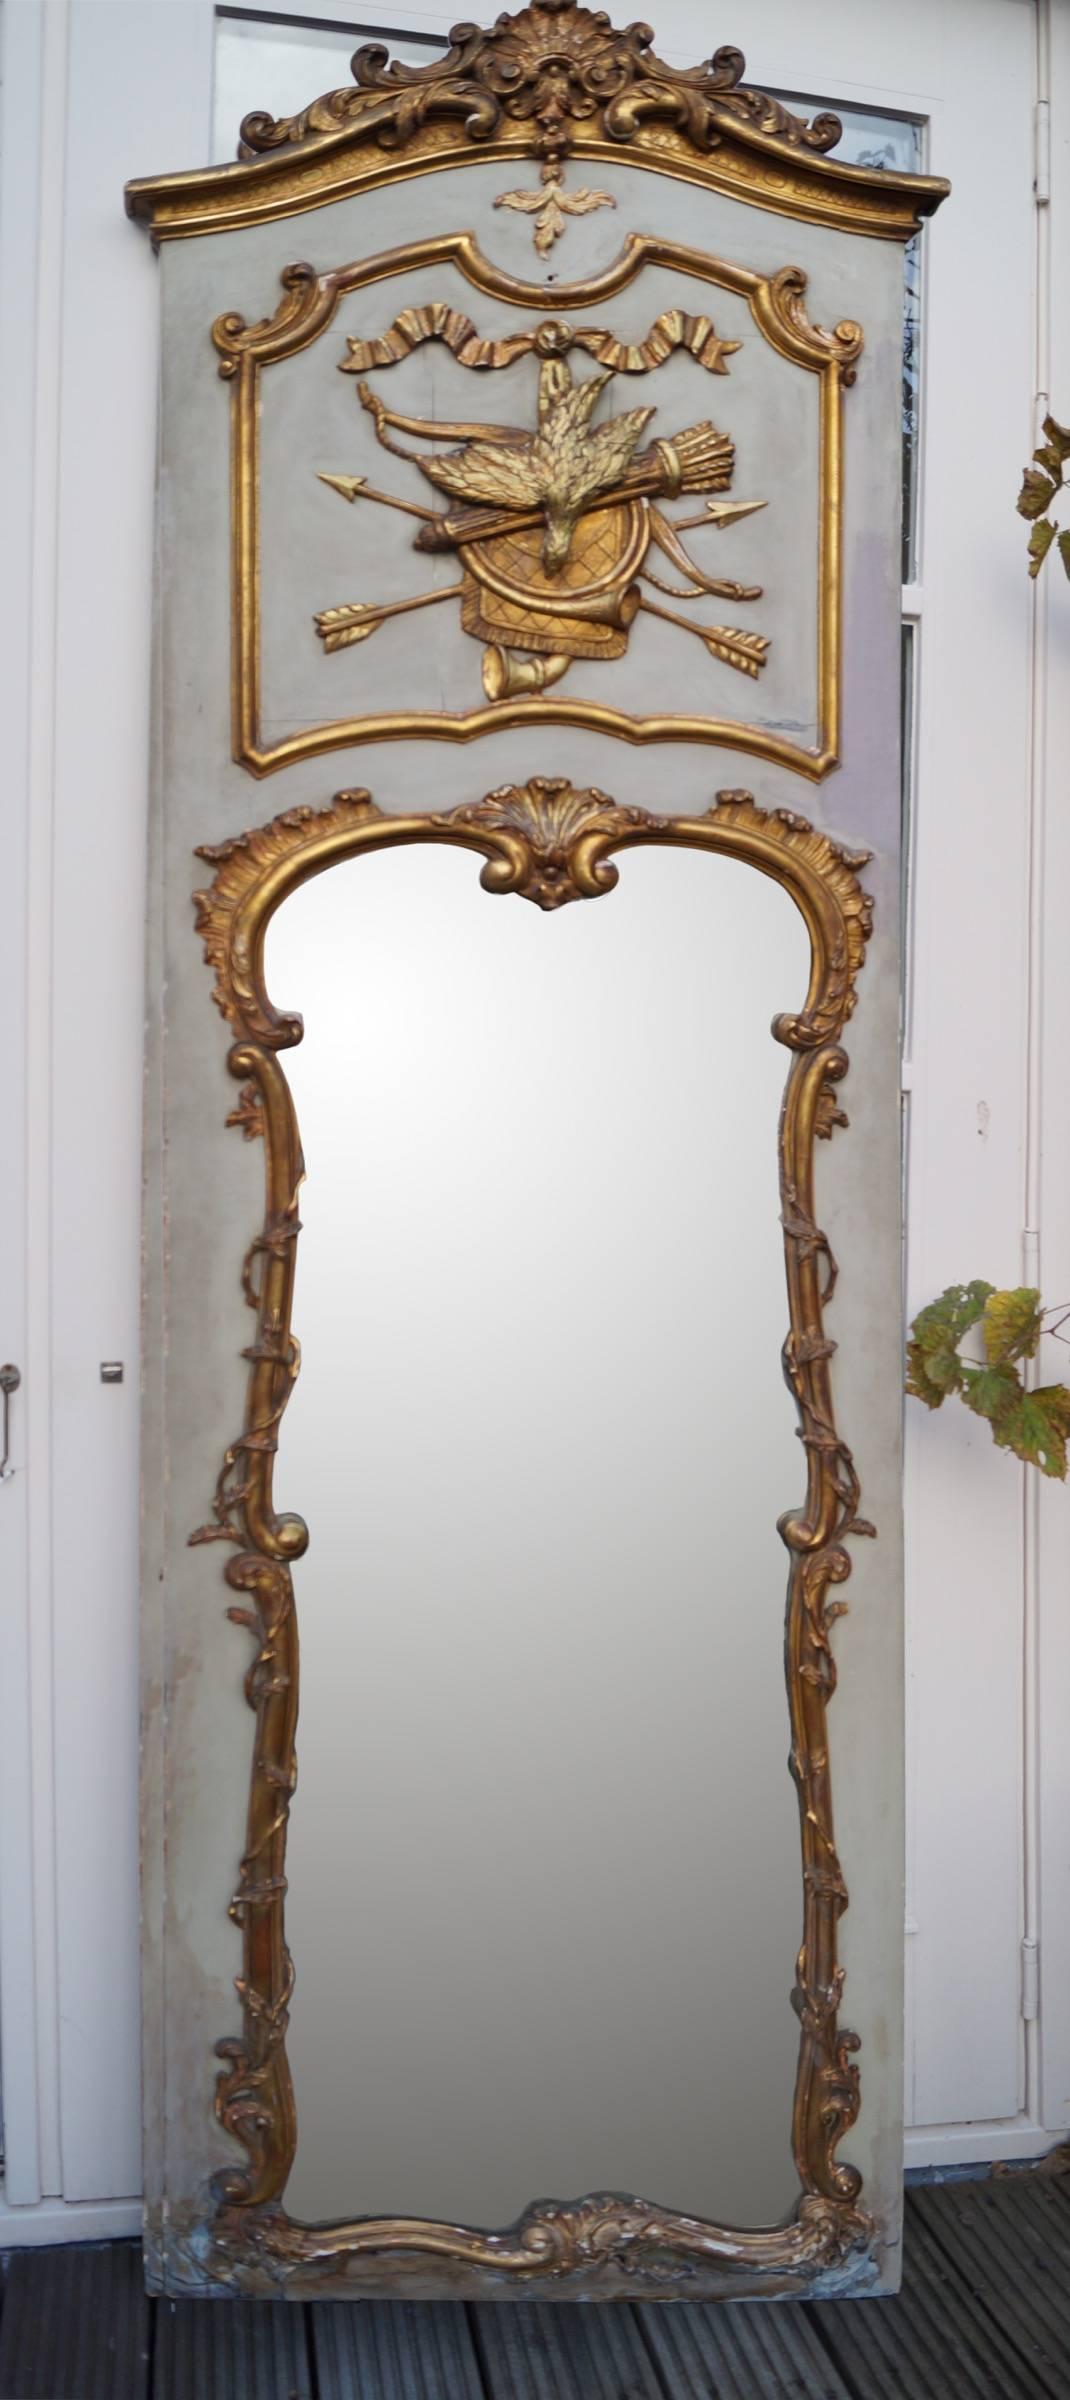 Rococo Mirror
18th century French hand-carved gilded trumeau or over mantel with hunting decor

Beautiful and rare mirror. Hand-carved and gilded on a blue grey wooden background.
France Rococo 1730-1760.

Good condition. Wear on wood, gilding